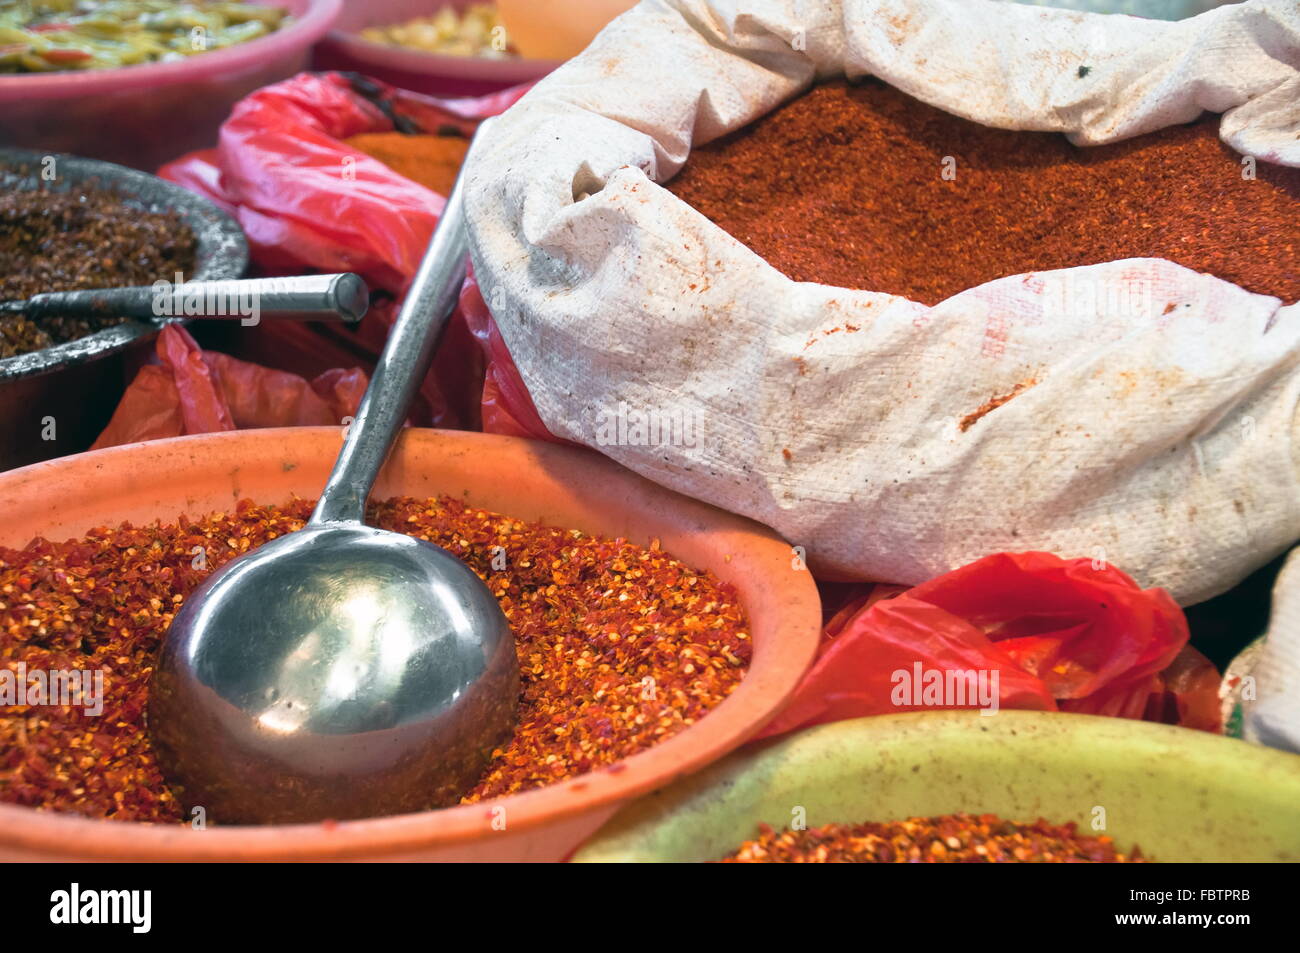 Asian bag of spices Stock Photo